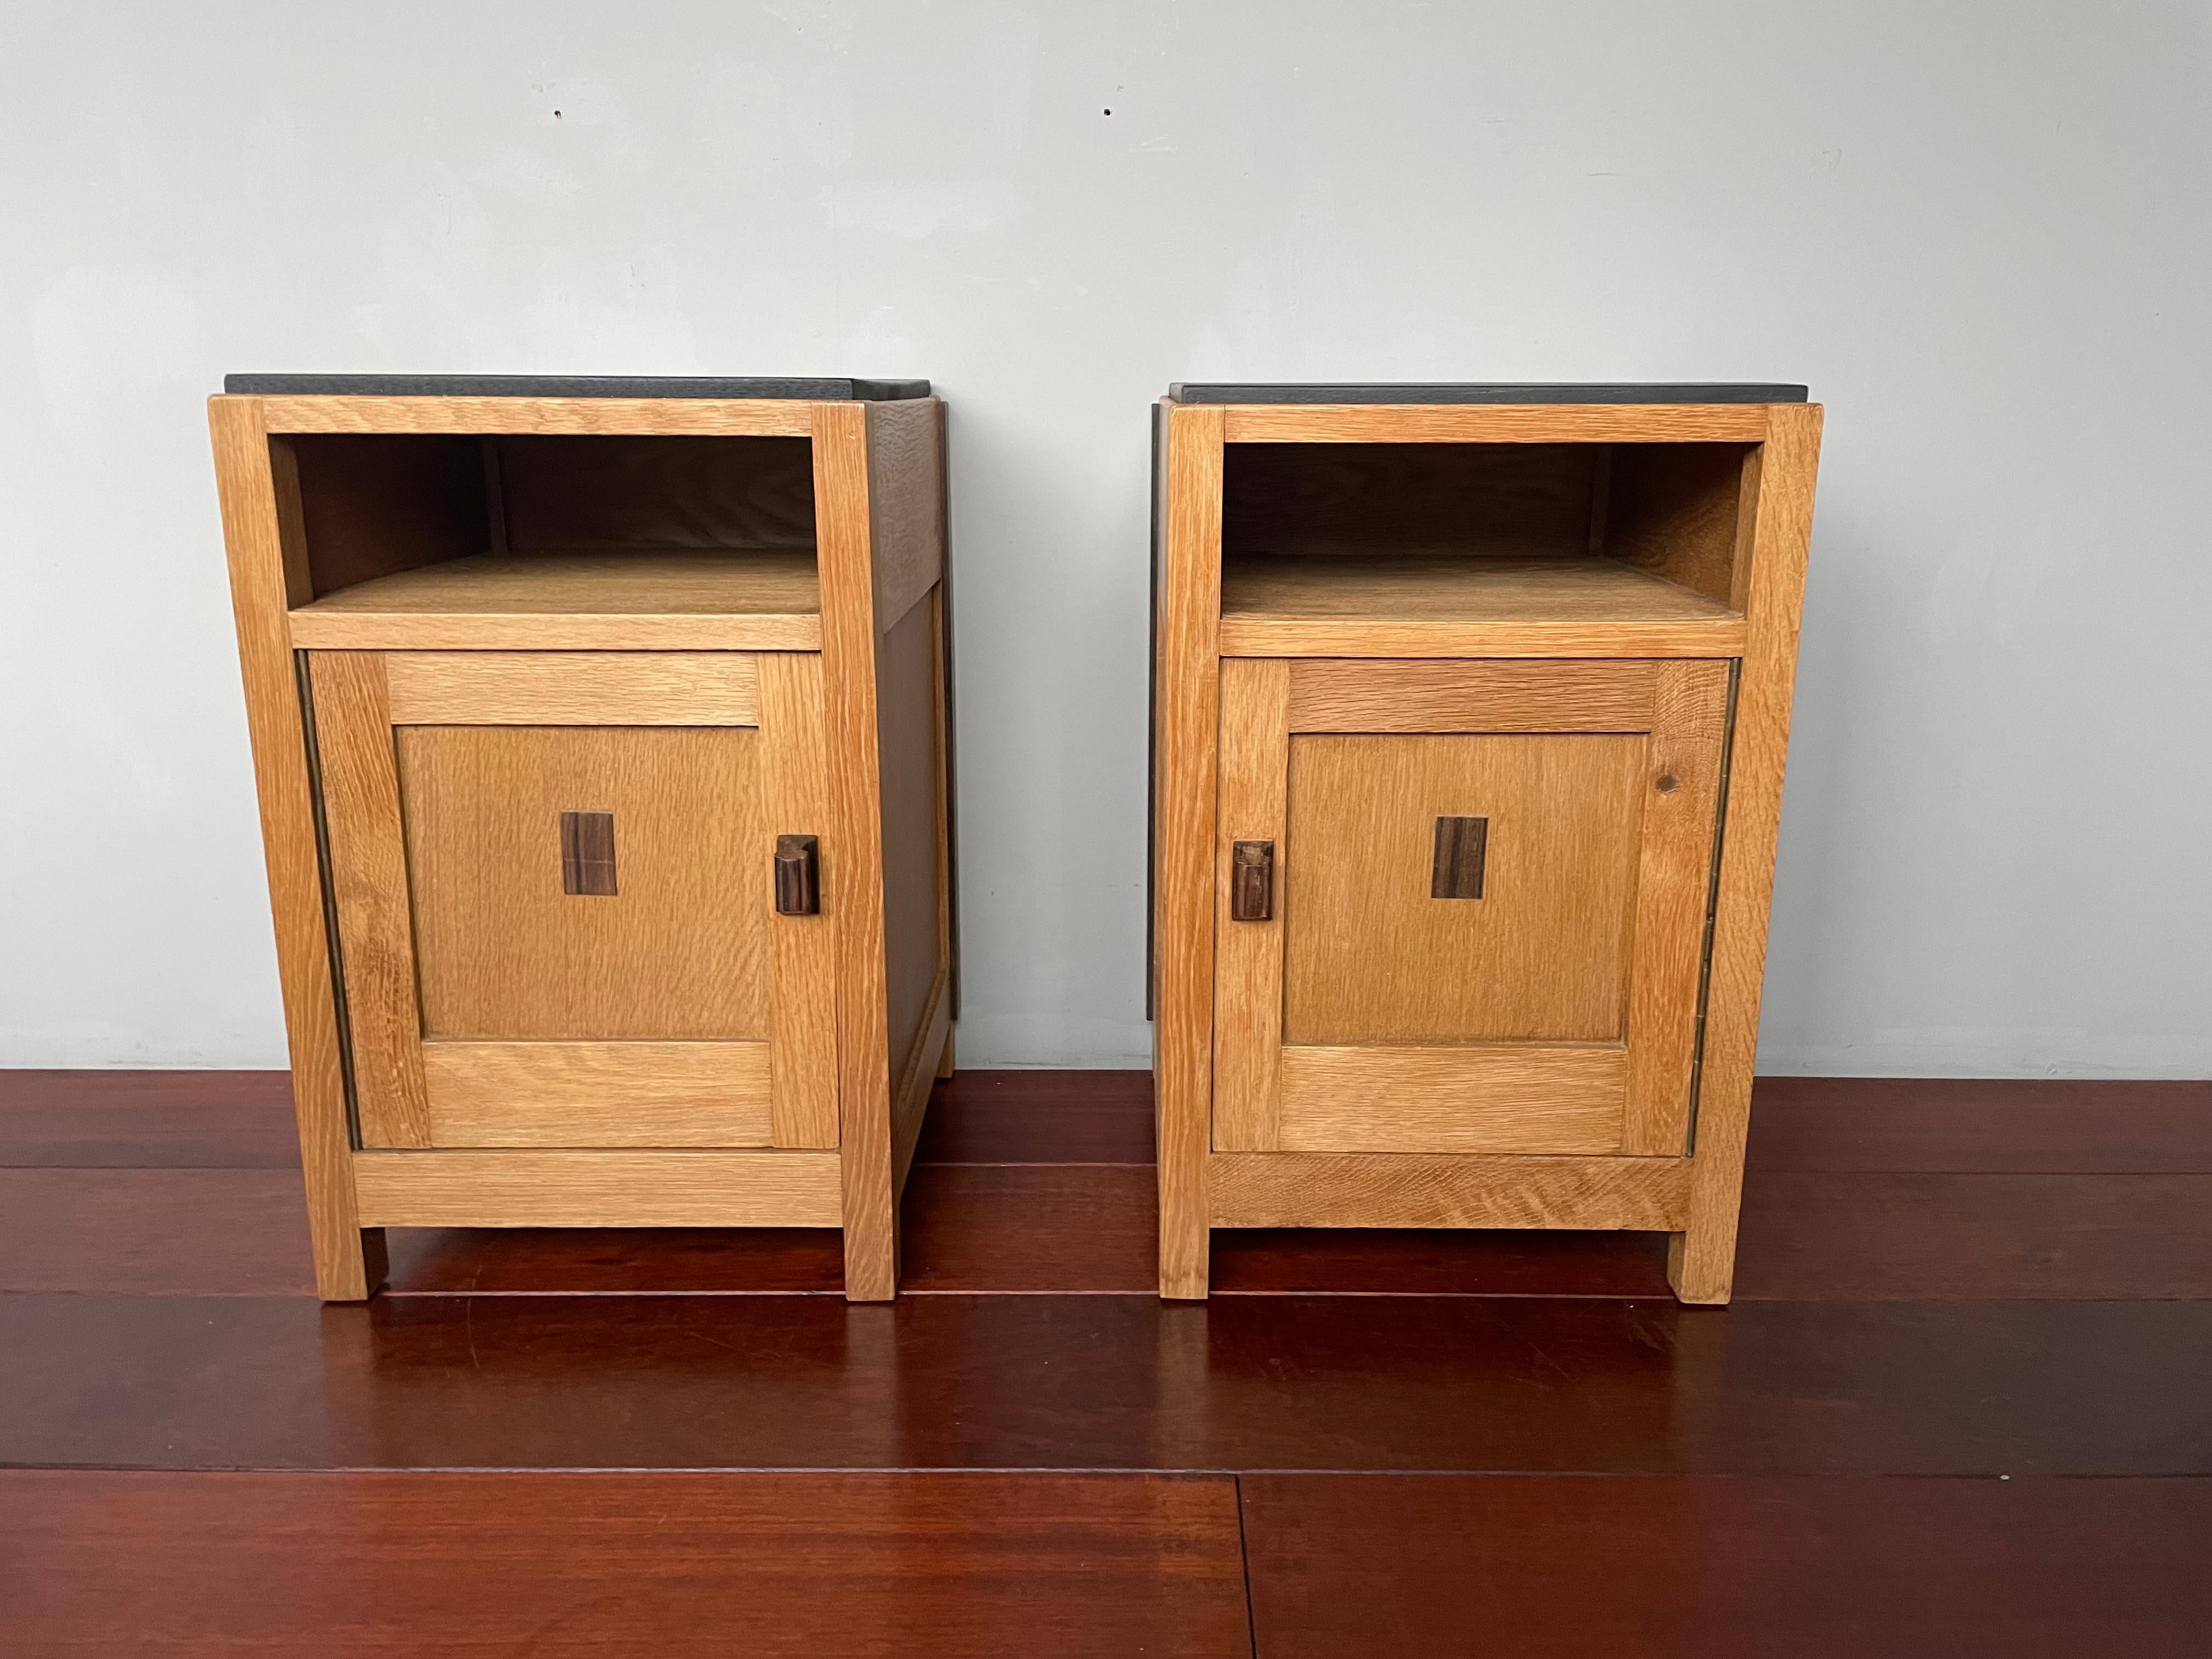 Beautiful pair of Arts & Crafts nightstands with coromandel details & handles.

If you are looking for timeless and beautifully handcrafted bedside cabinets then this Arts & Crafts pair could be yours to own and enjoy soon. They are made of a